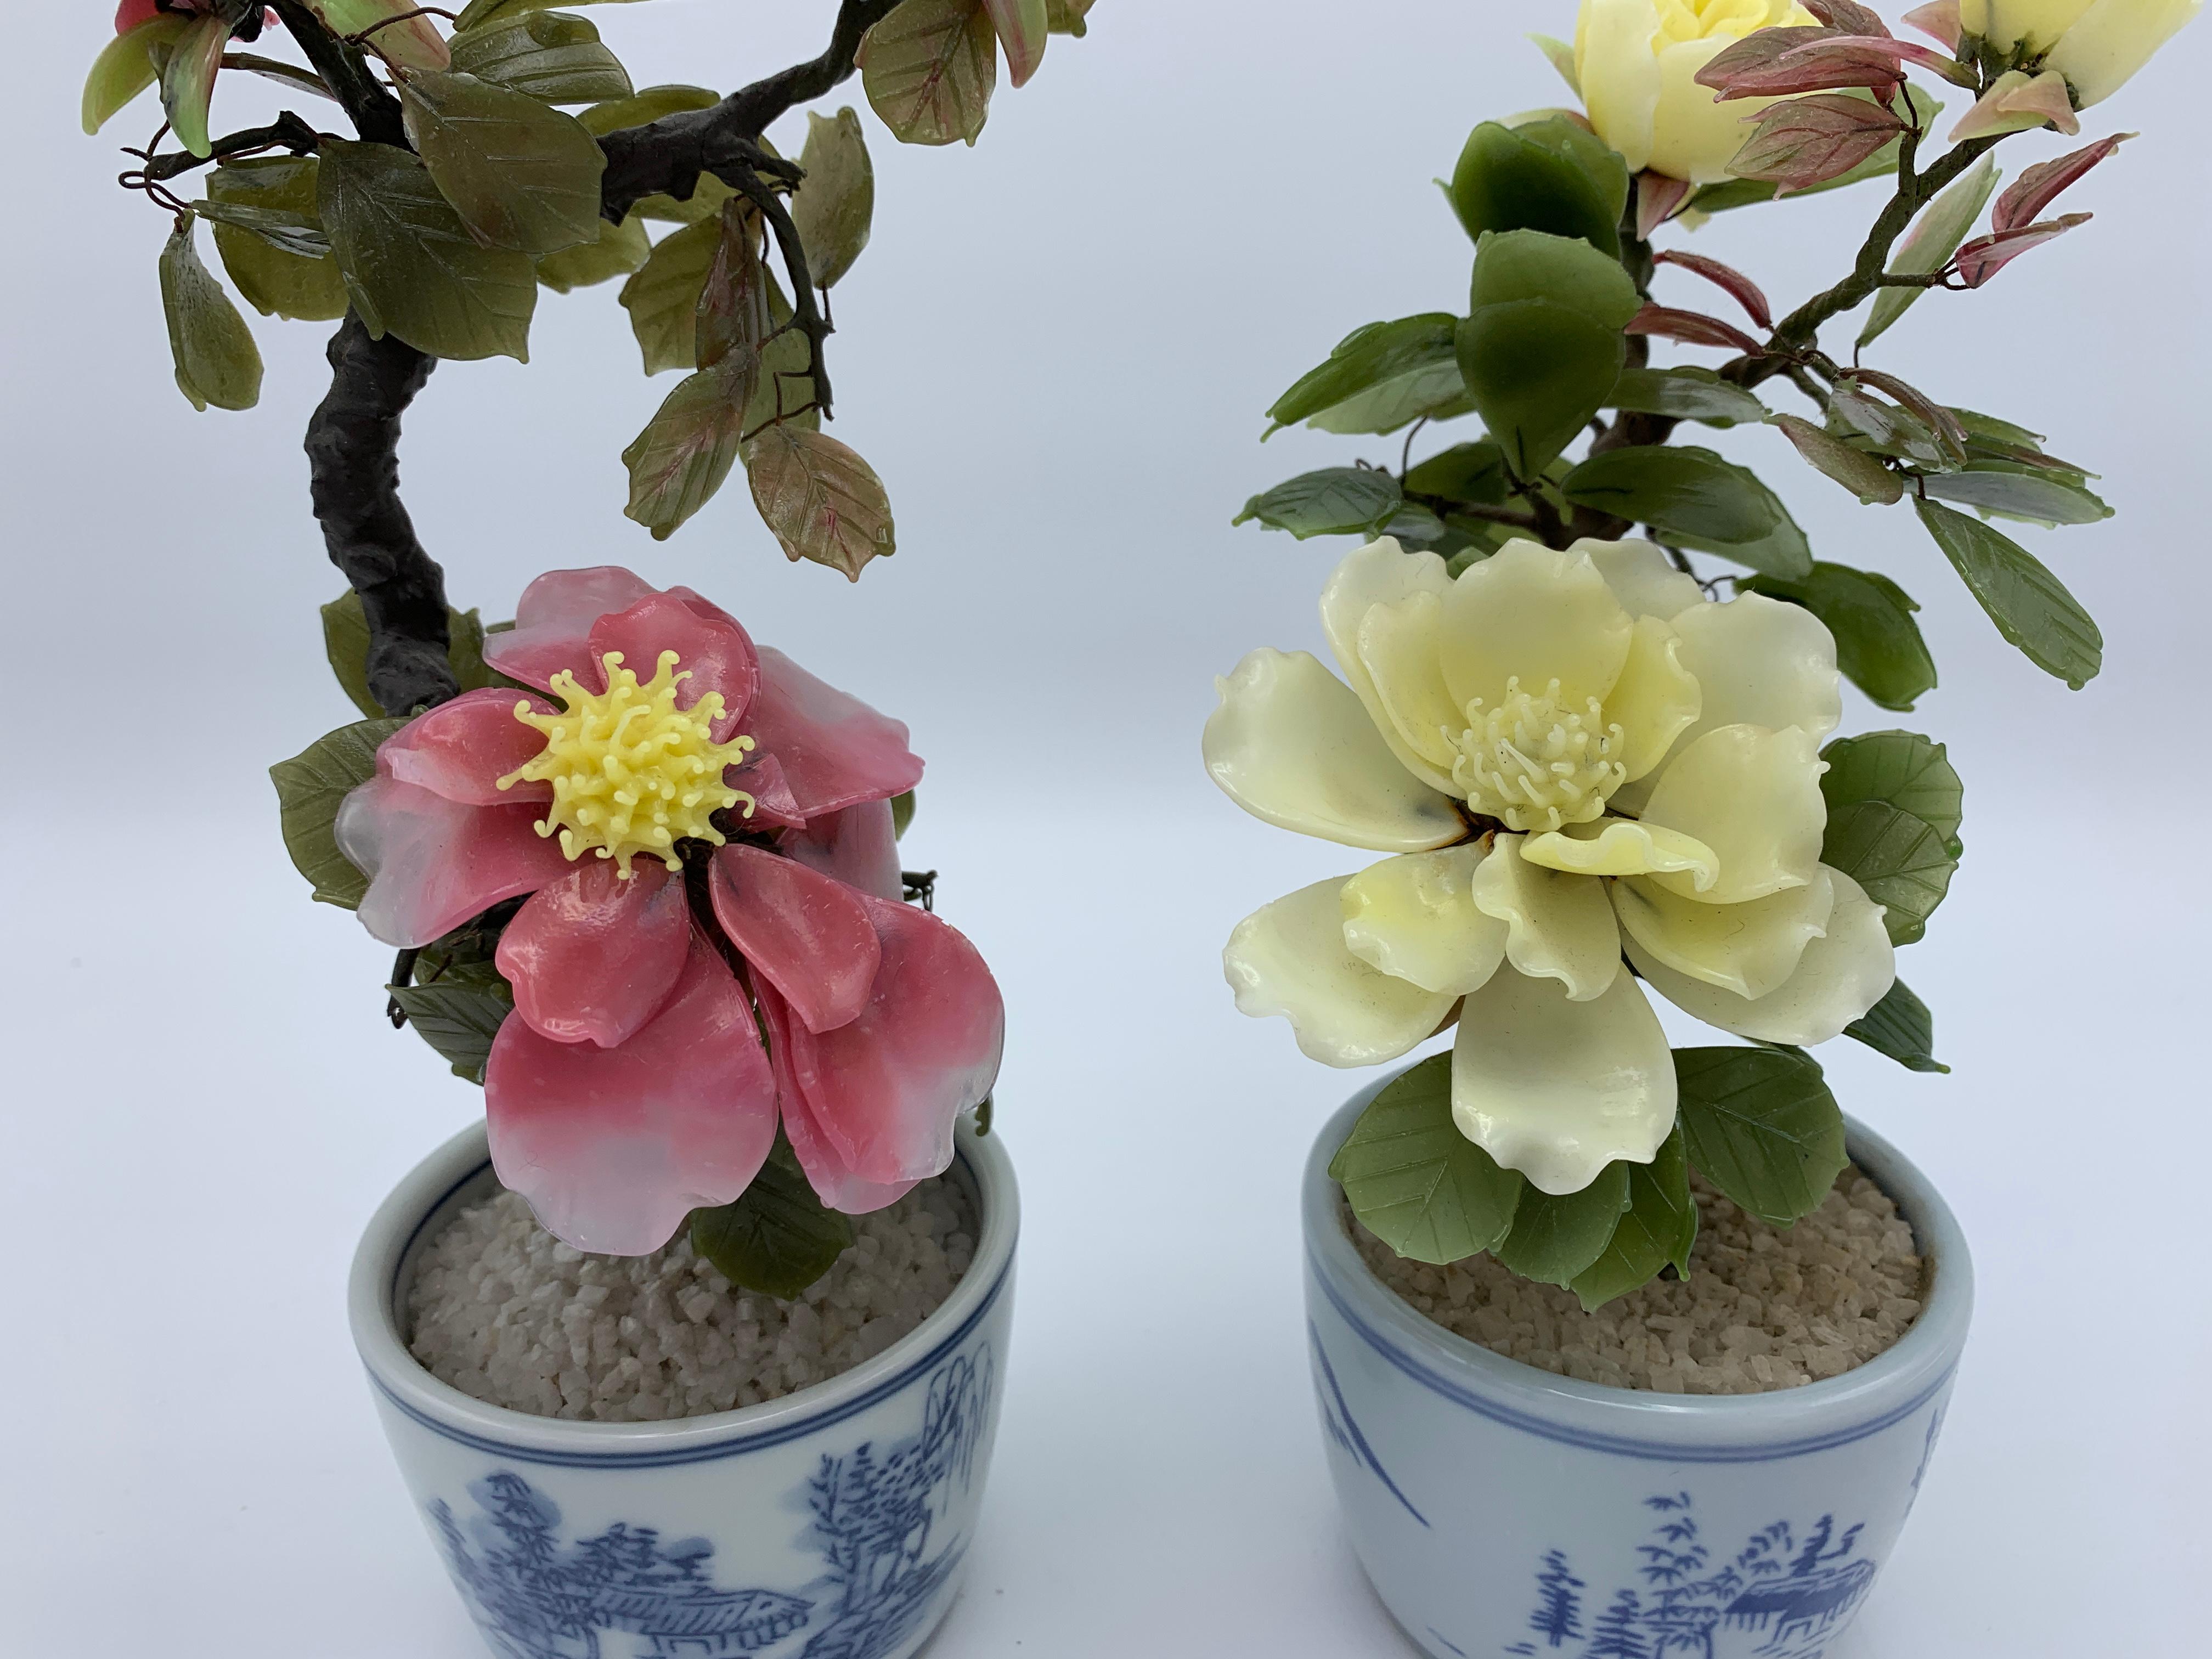 Offered is a fabulous, pair of 1970s jade tree sculptures in the form of peonies. The pair includes one pink with yellow peony and one solid-yellow peony. The pair are each 'planted' in blue and white cachepots, with ornate chinoiserie scenery